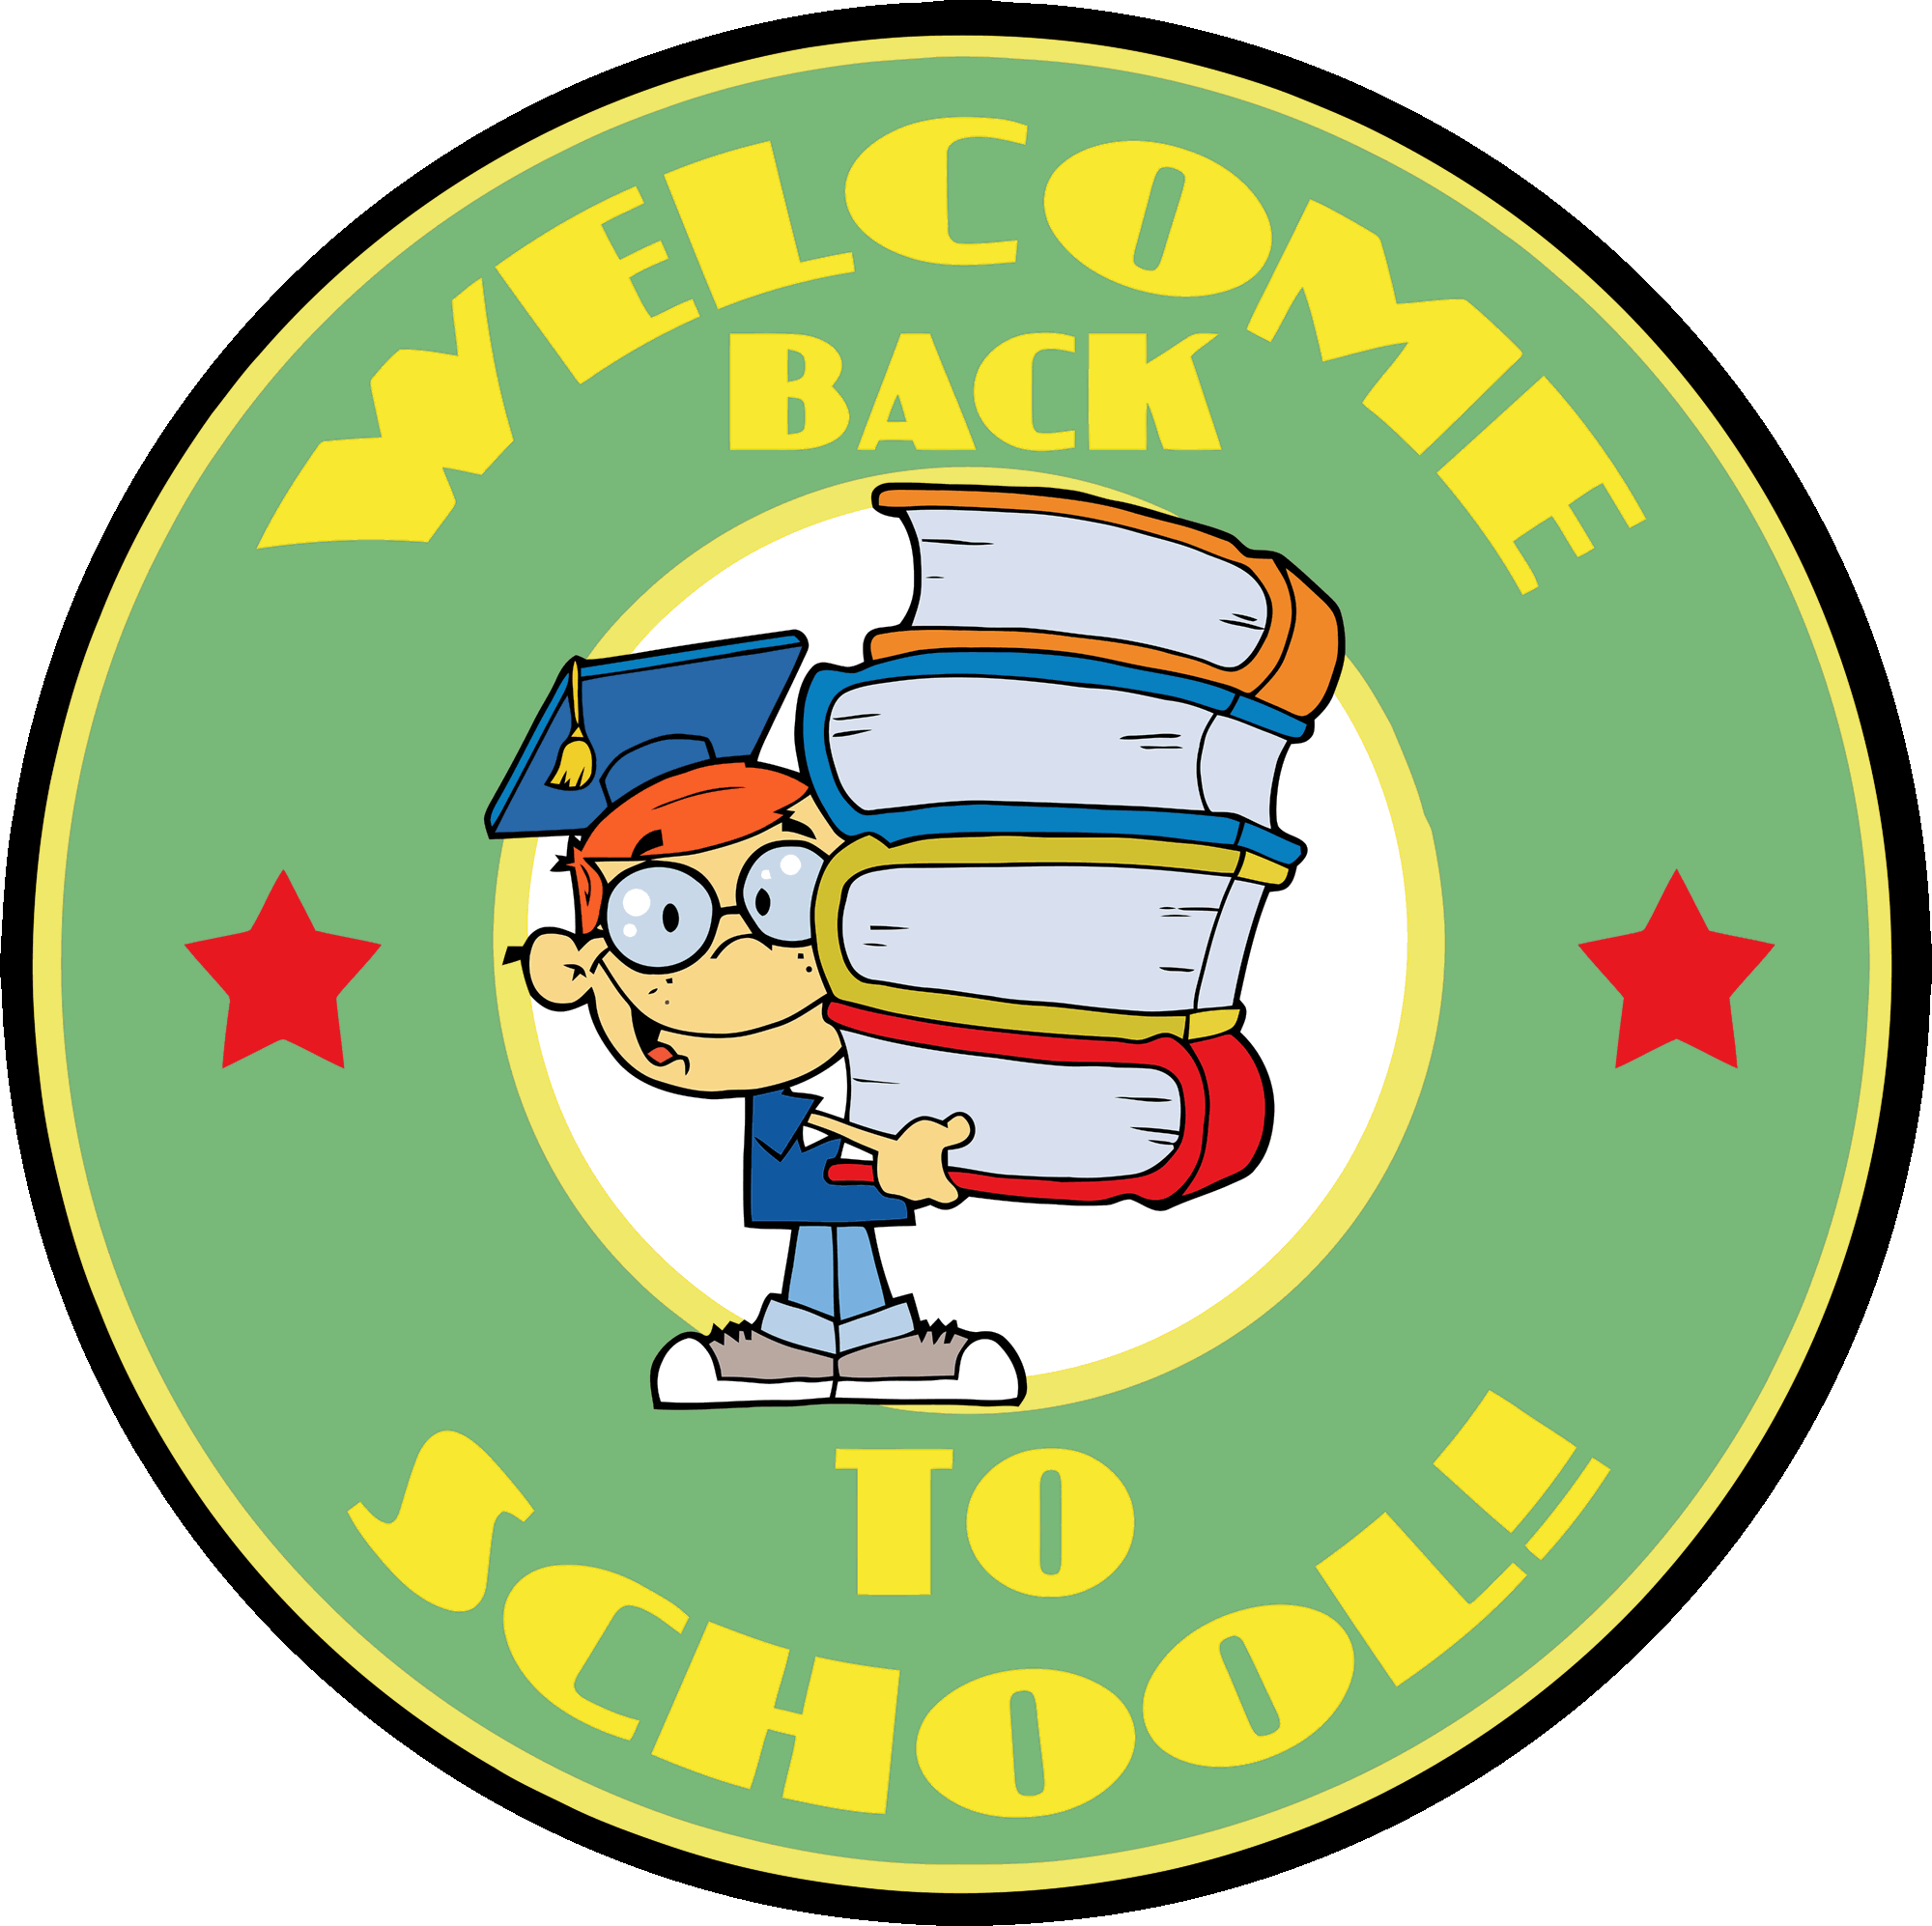 Welcome back to school clip art black and white - dbclipart.com